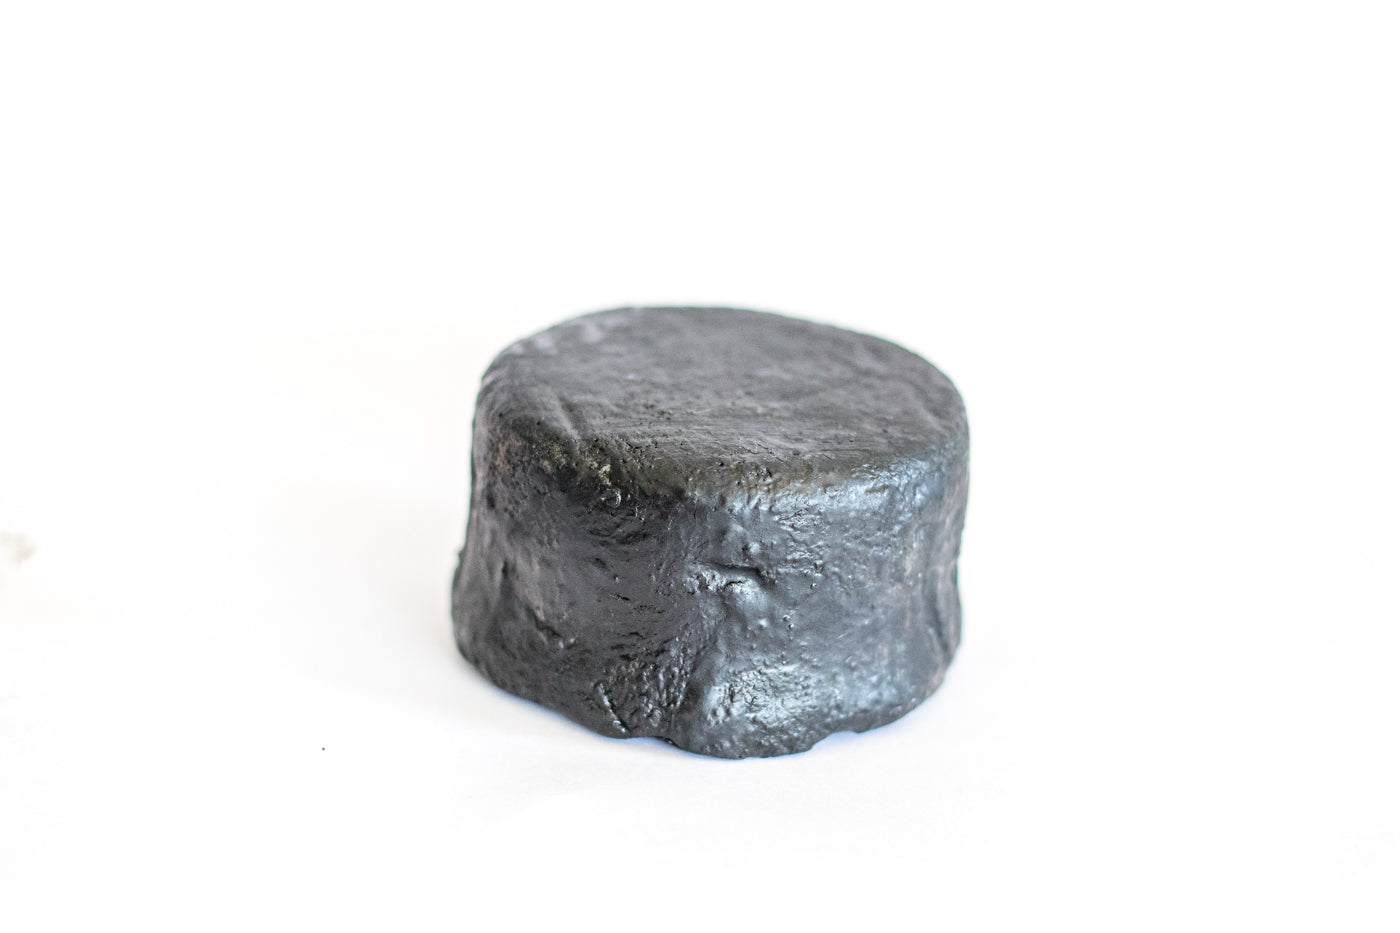 Charcoal Cheese